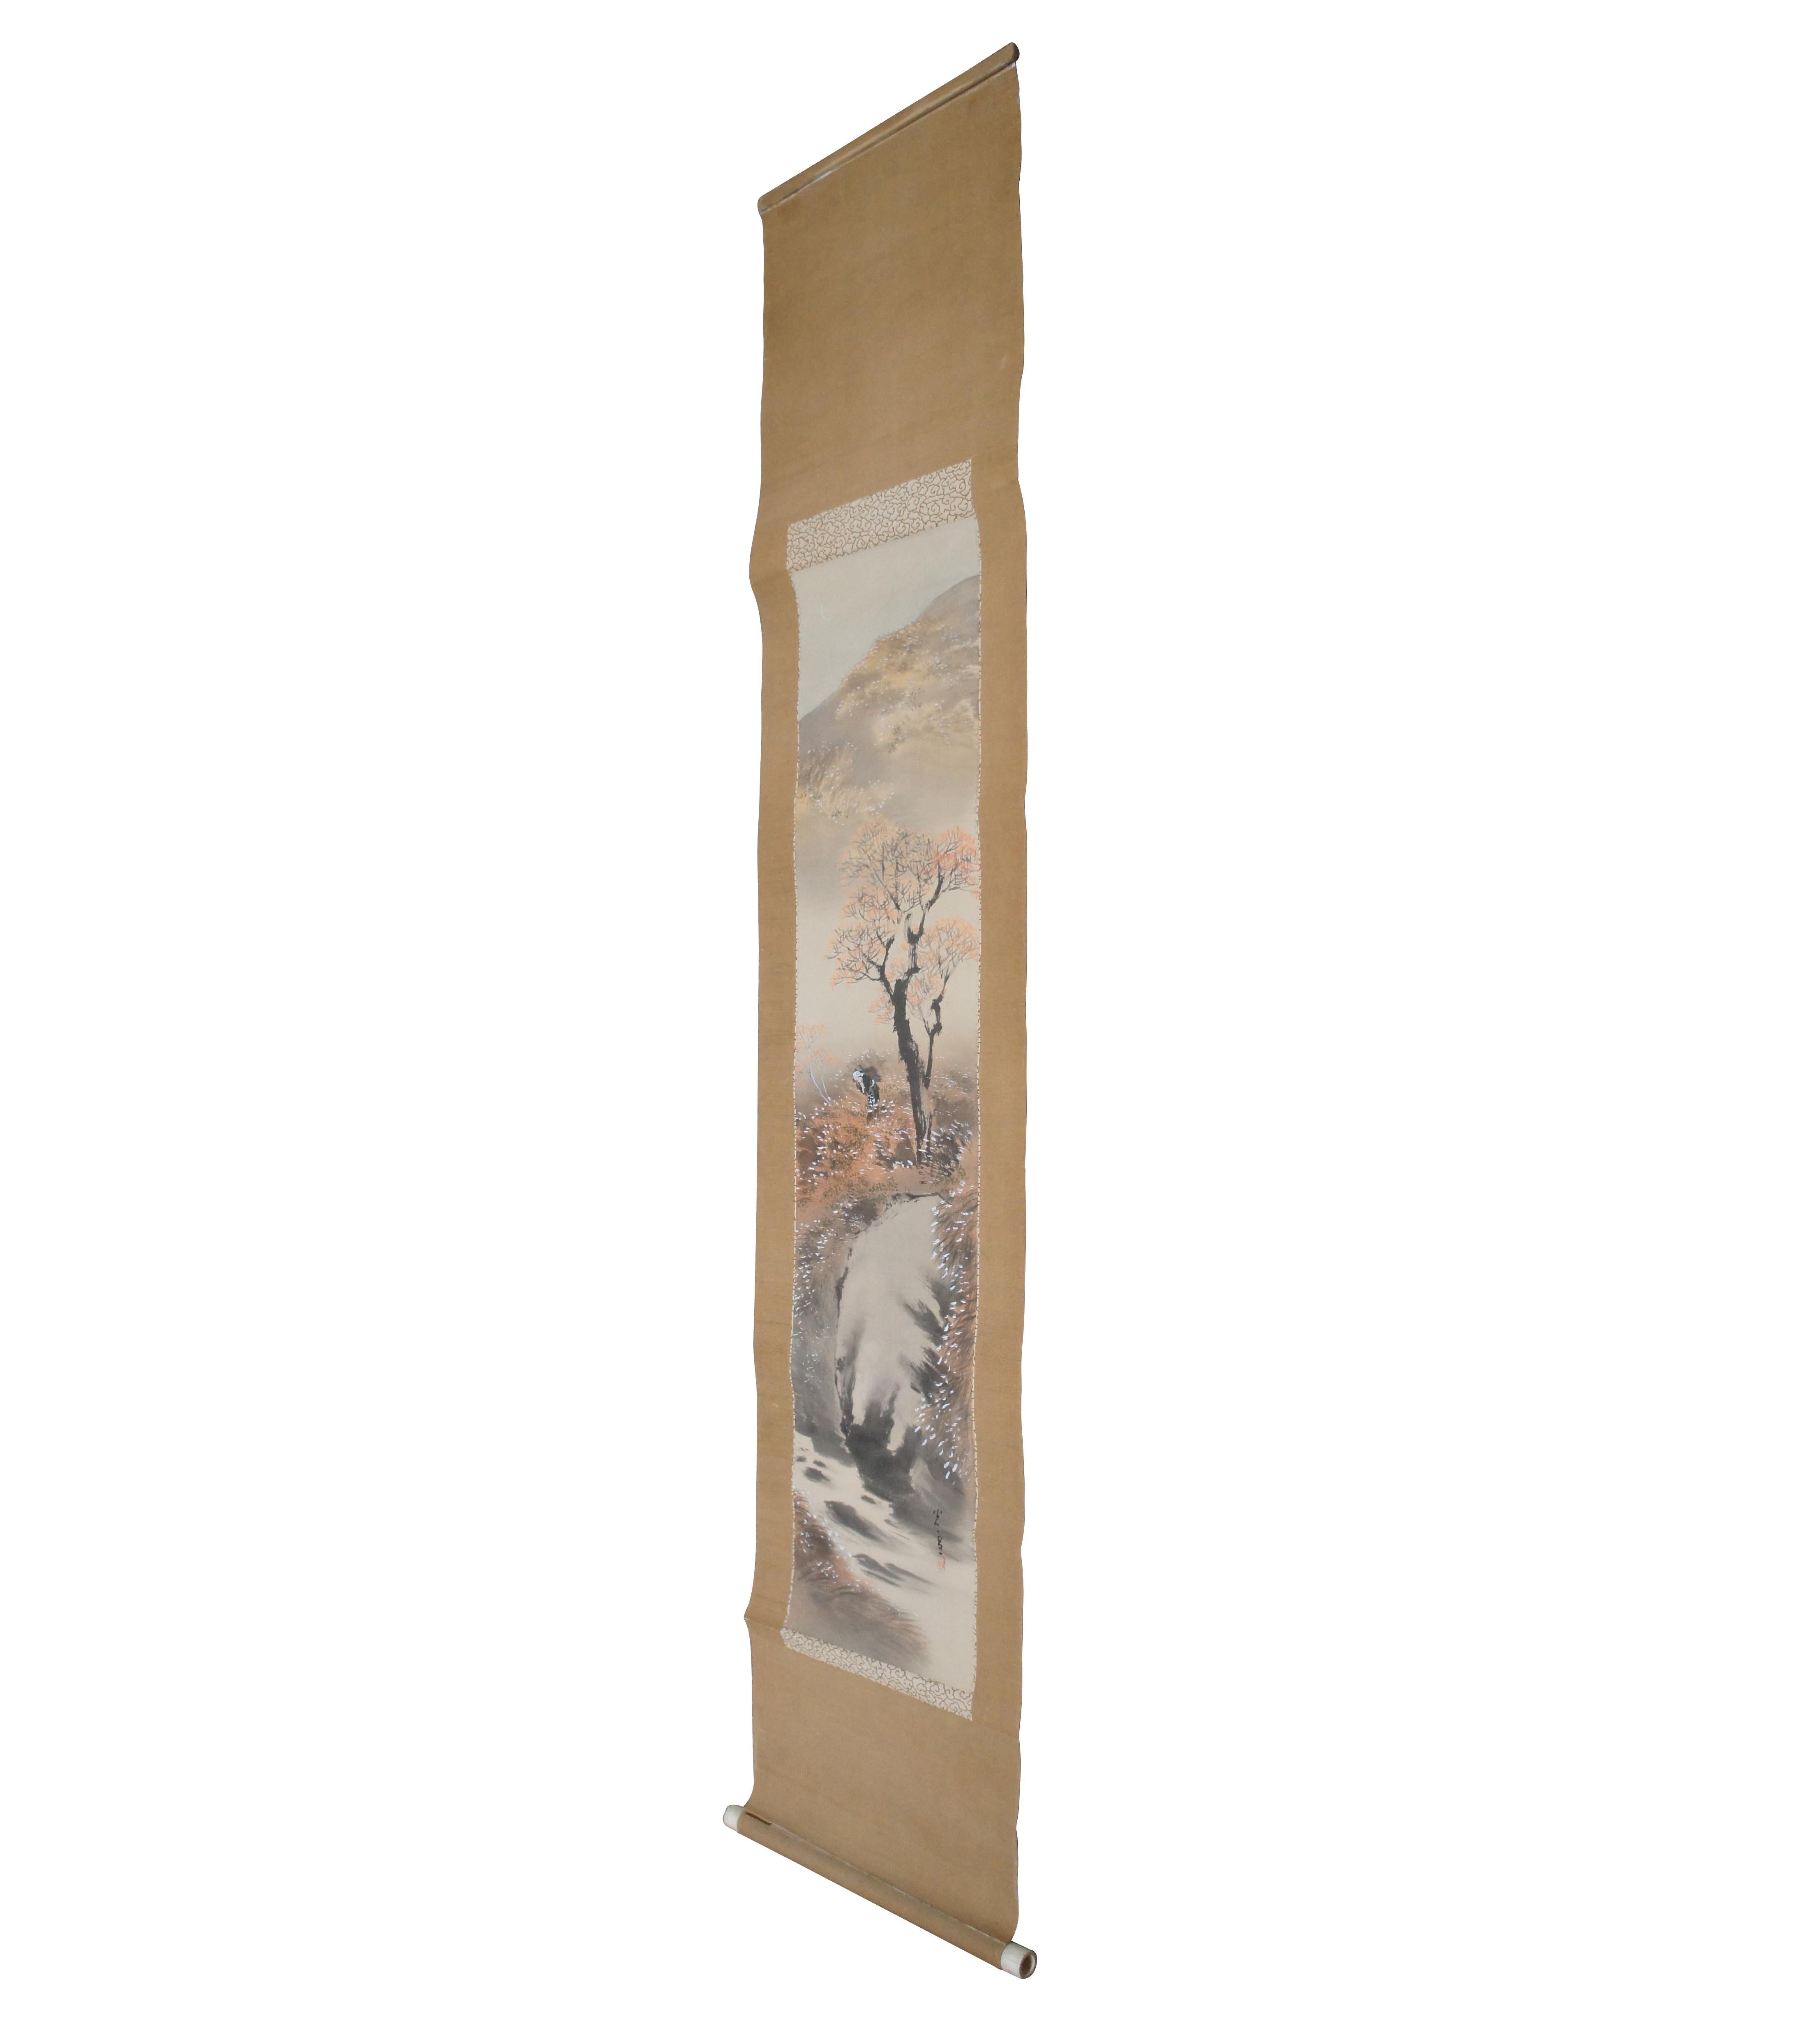 Signed antique Asian watercolor on silk landscape painting showing a small waterfall over a creek, topped with a tree and a woman carrying a bundle of wood with a mountain in the background. Mounted on a beige wall hanging scroll.

??/shou xue/: